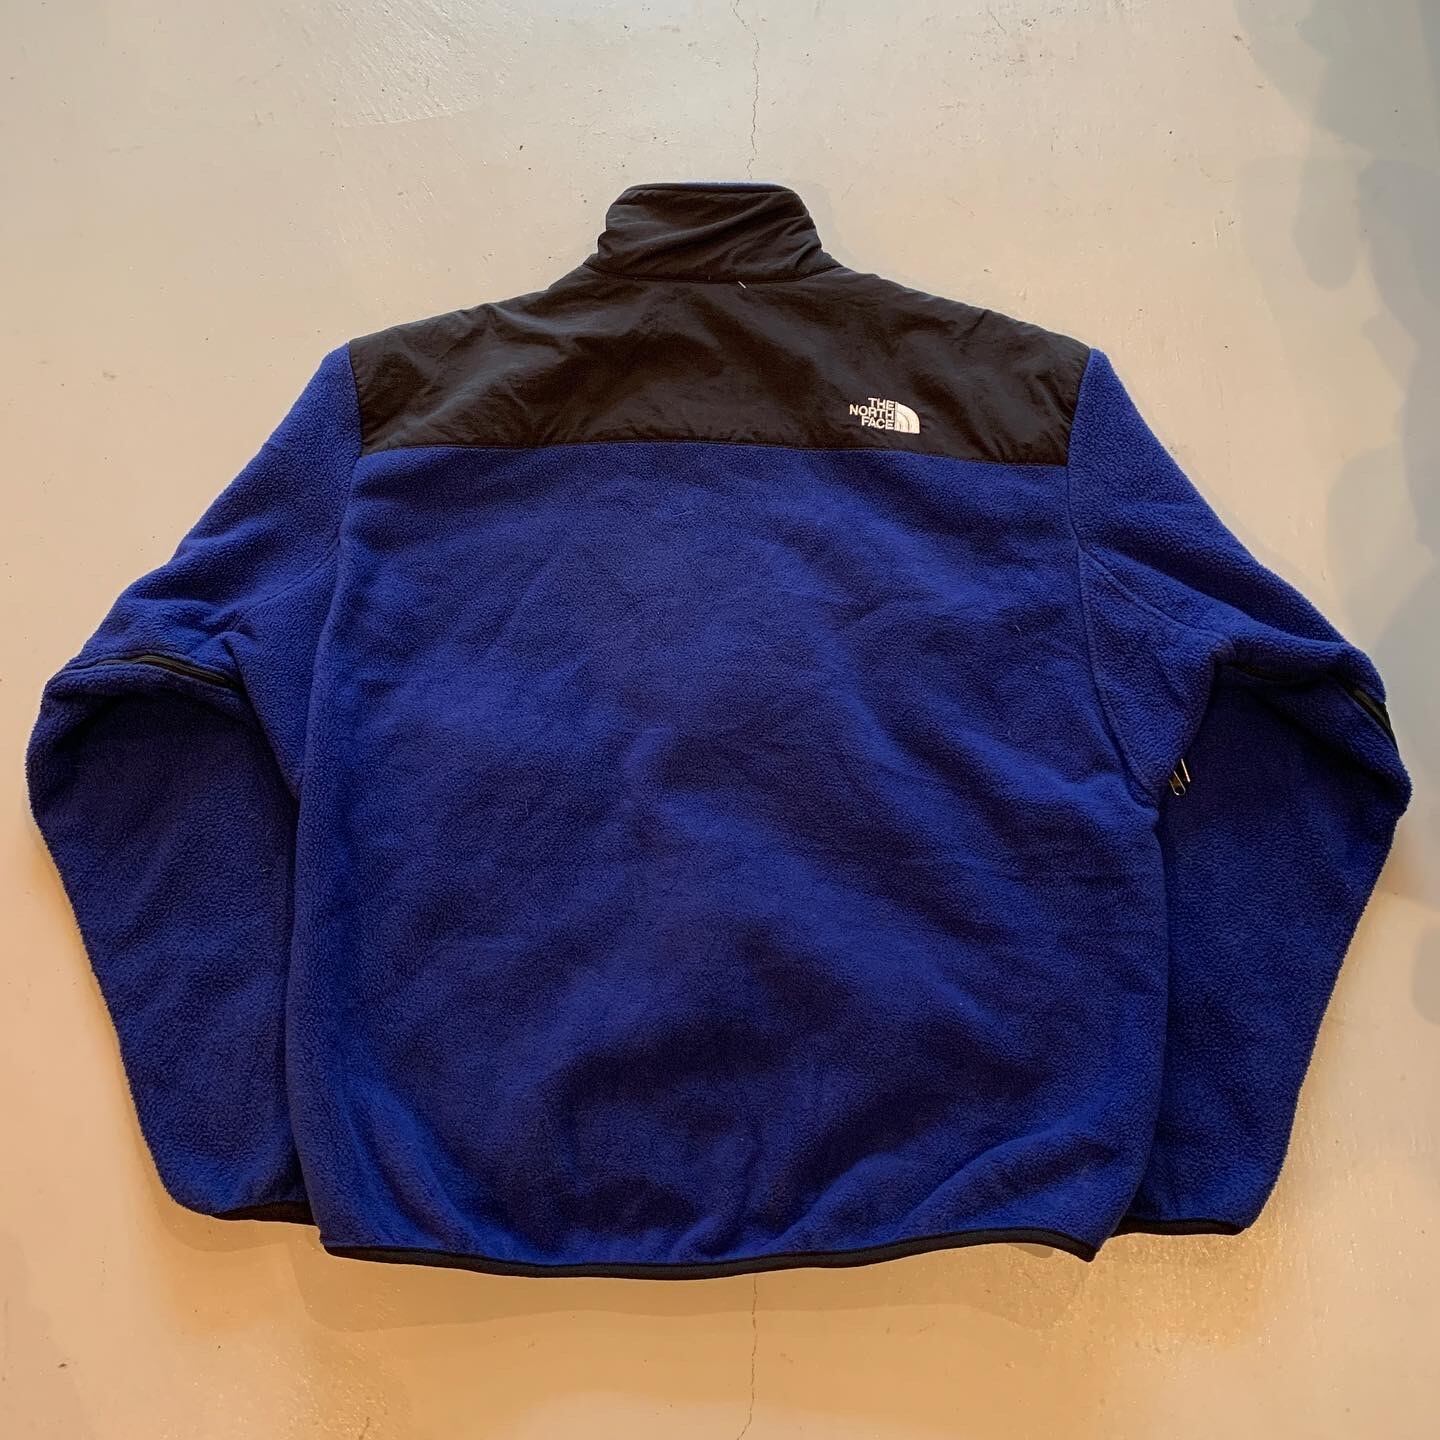 s THE NORTH FACE denali fleece jacket高円寺店   What'z up